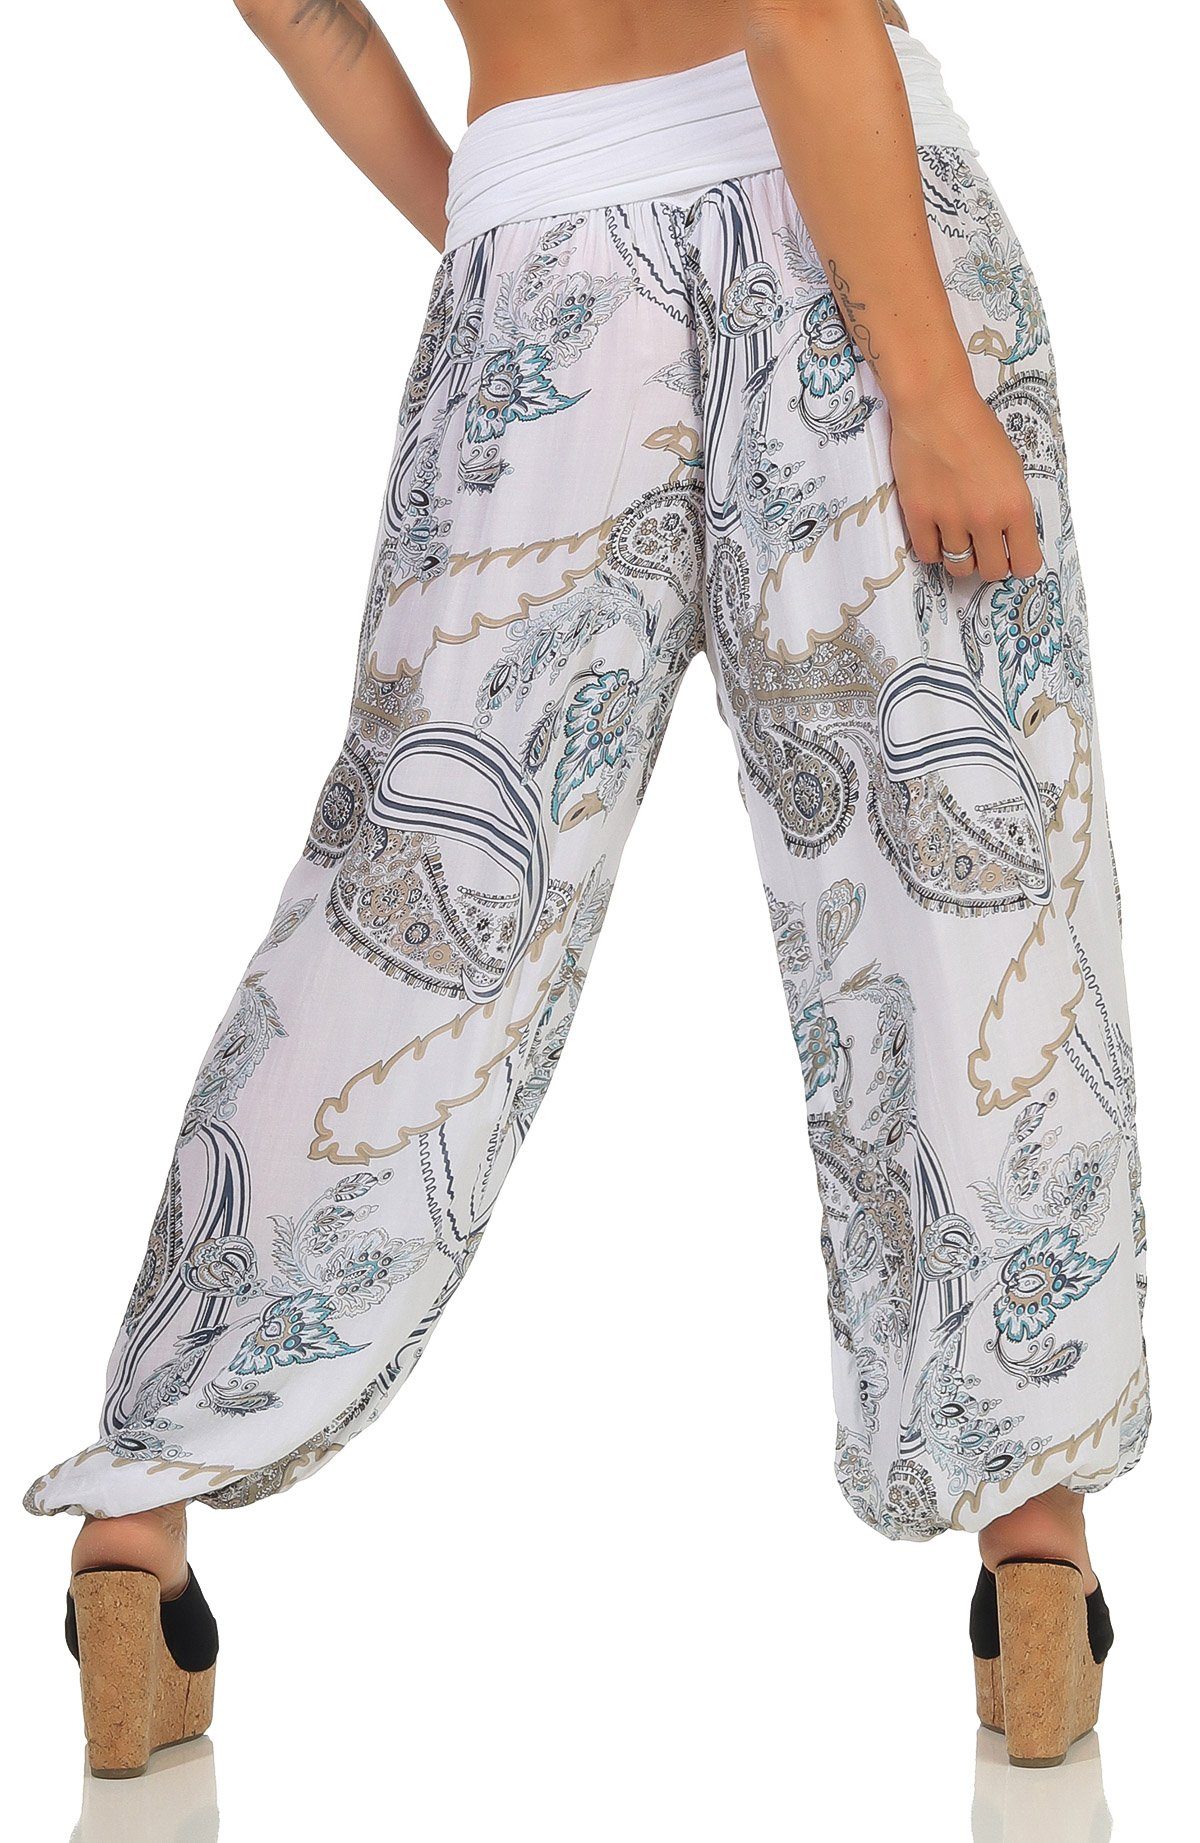 7185 mit All-Over-Print more Haremshose than weiß fashion Pluderhose malito